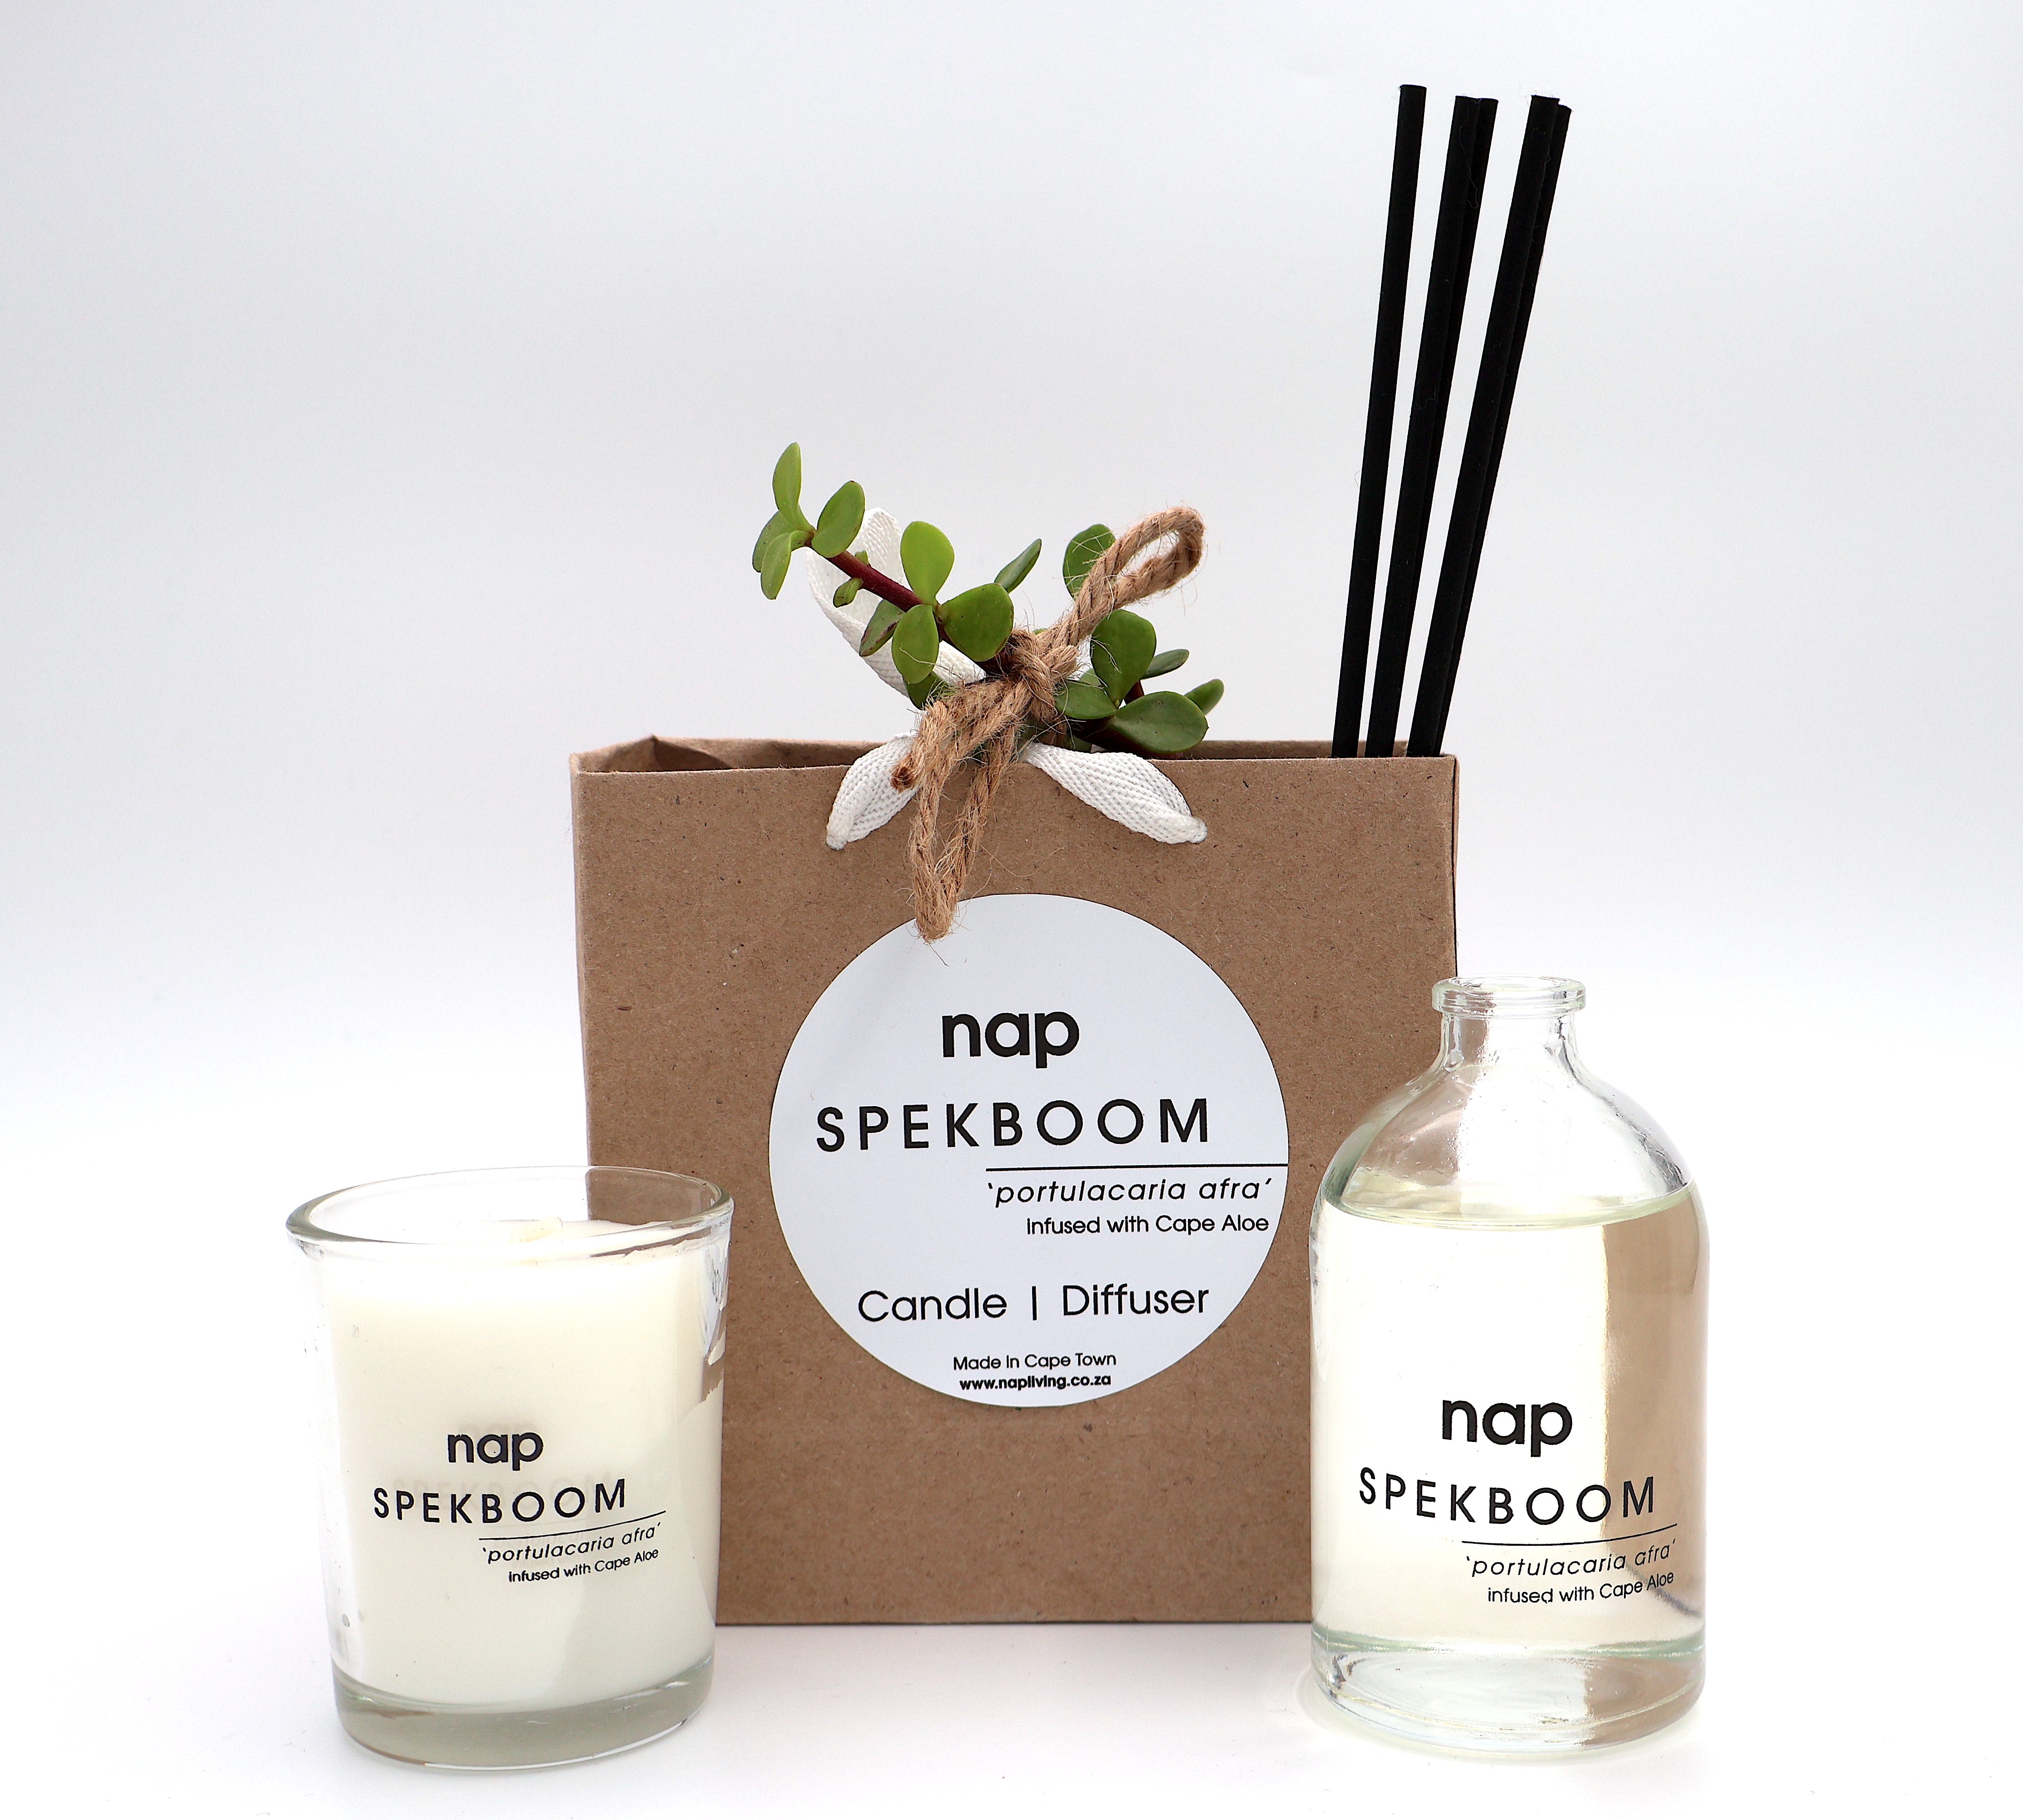 nap SPEKBOOM CANDLE AND DIFFUSER SET